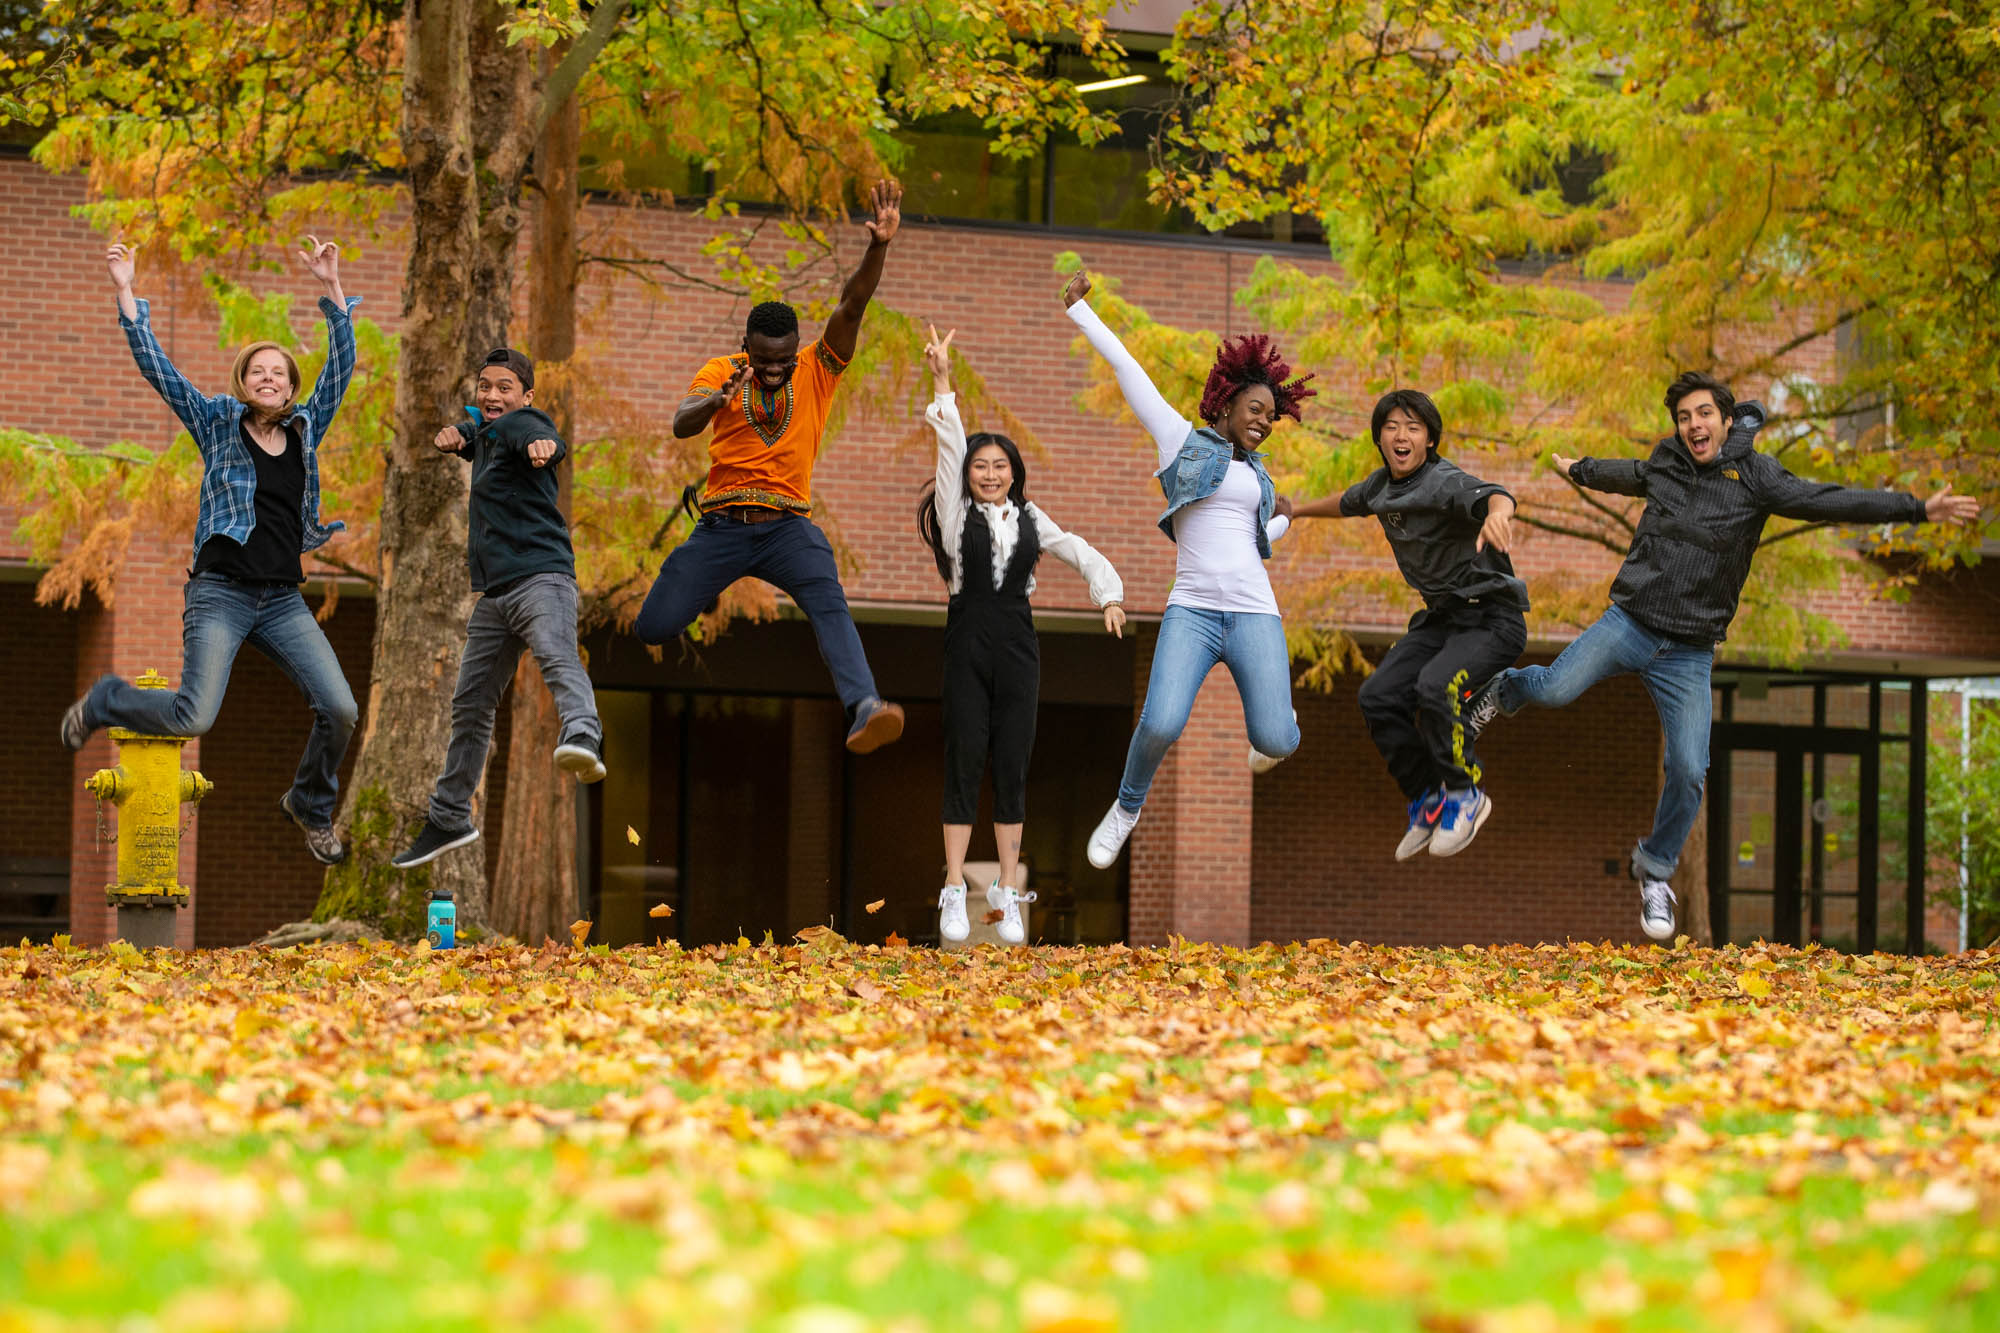 Students jumping in the air over a grassy field with fall leaves on the ground.